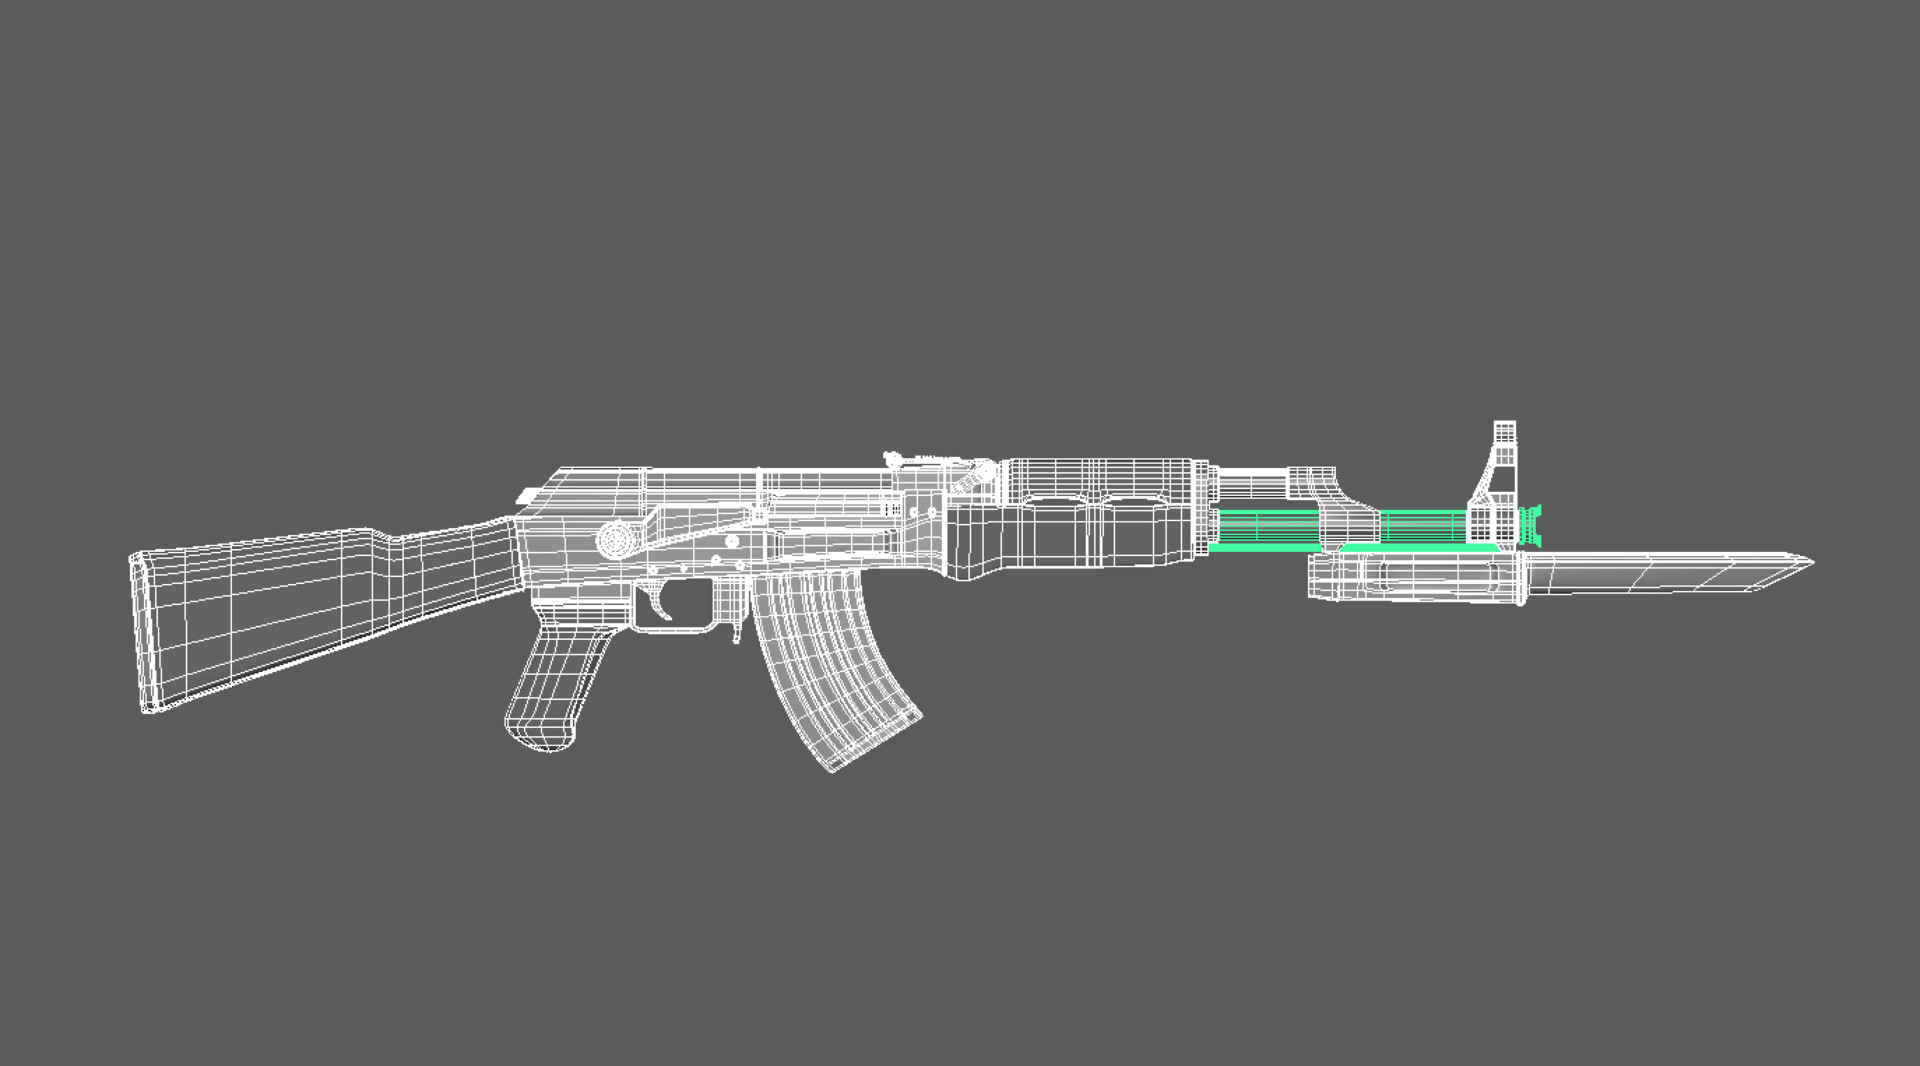 arkodigital❄️ on X: Check out the new skin collection from @okGRAPHS and I  : The Designer Collection. We're releasing the AK-47 first since it's the  basis for the whole concept. We took